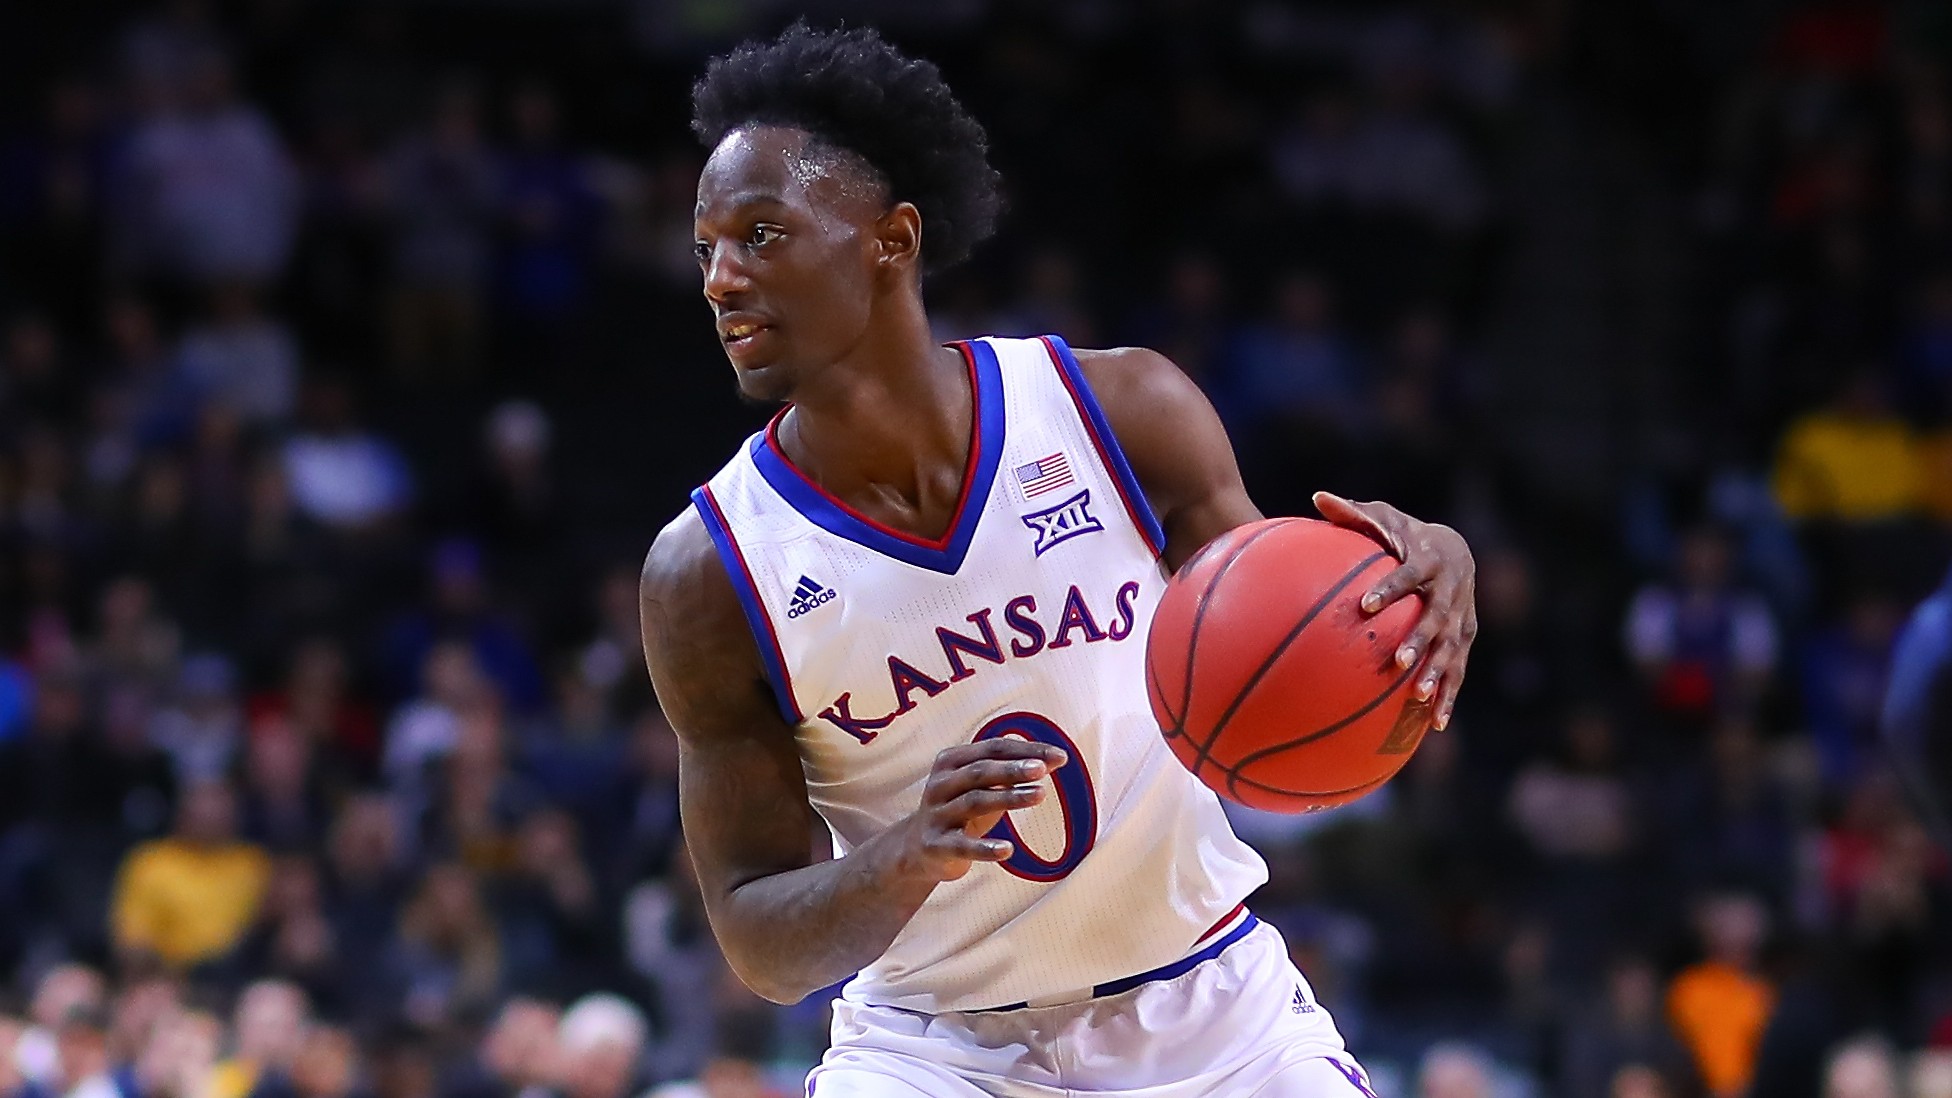 Creighton vs. Kansas College Basketball Odds & Picks: Bank on Jayhawks’ Defense at Home article feature image